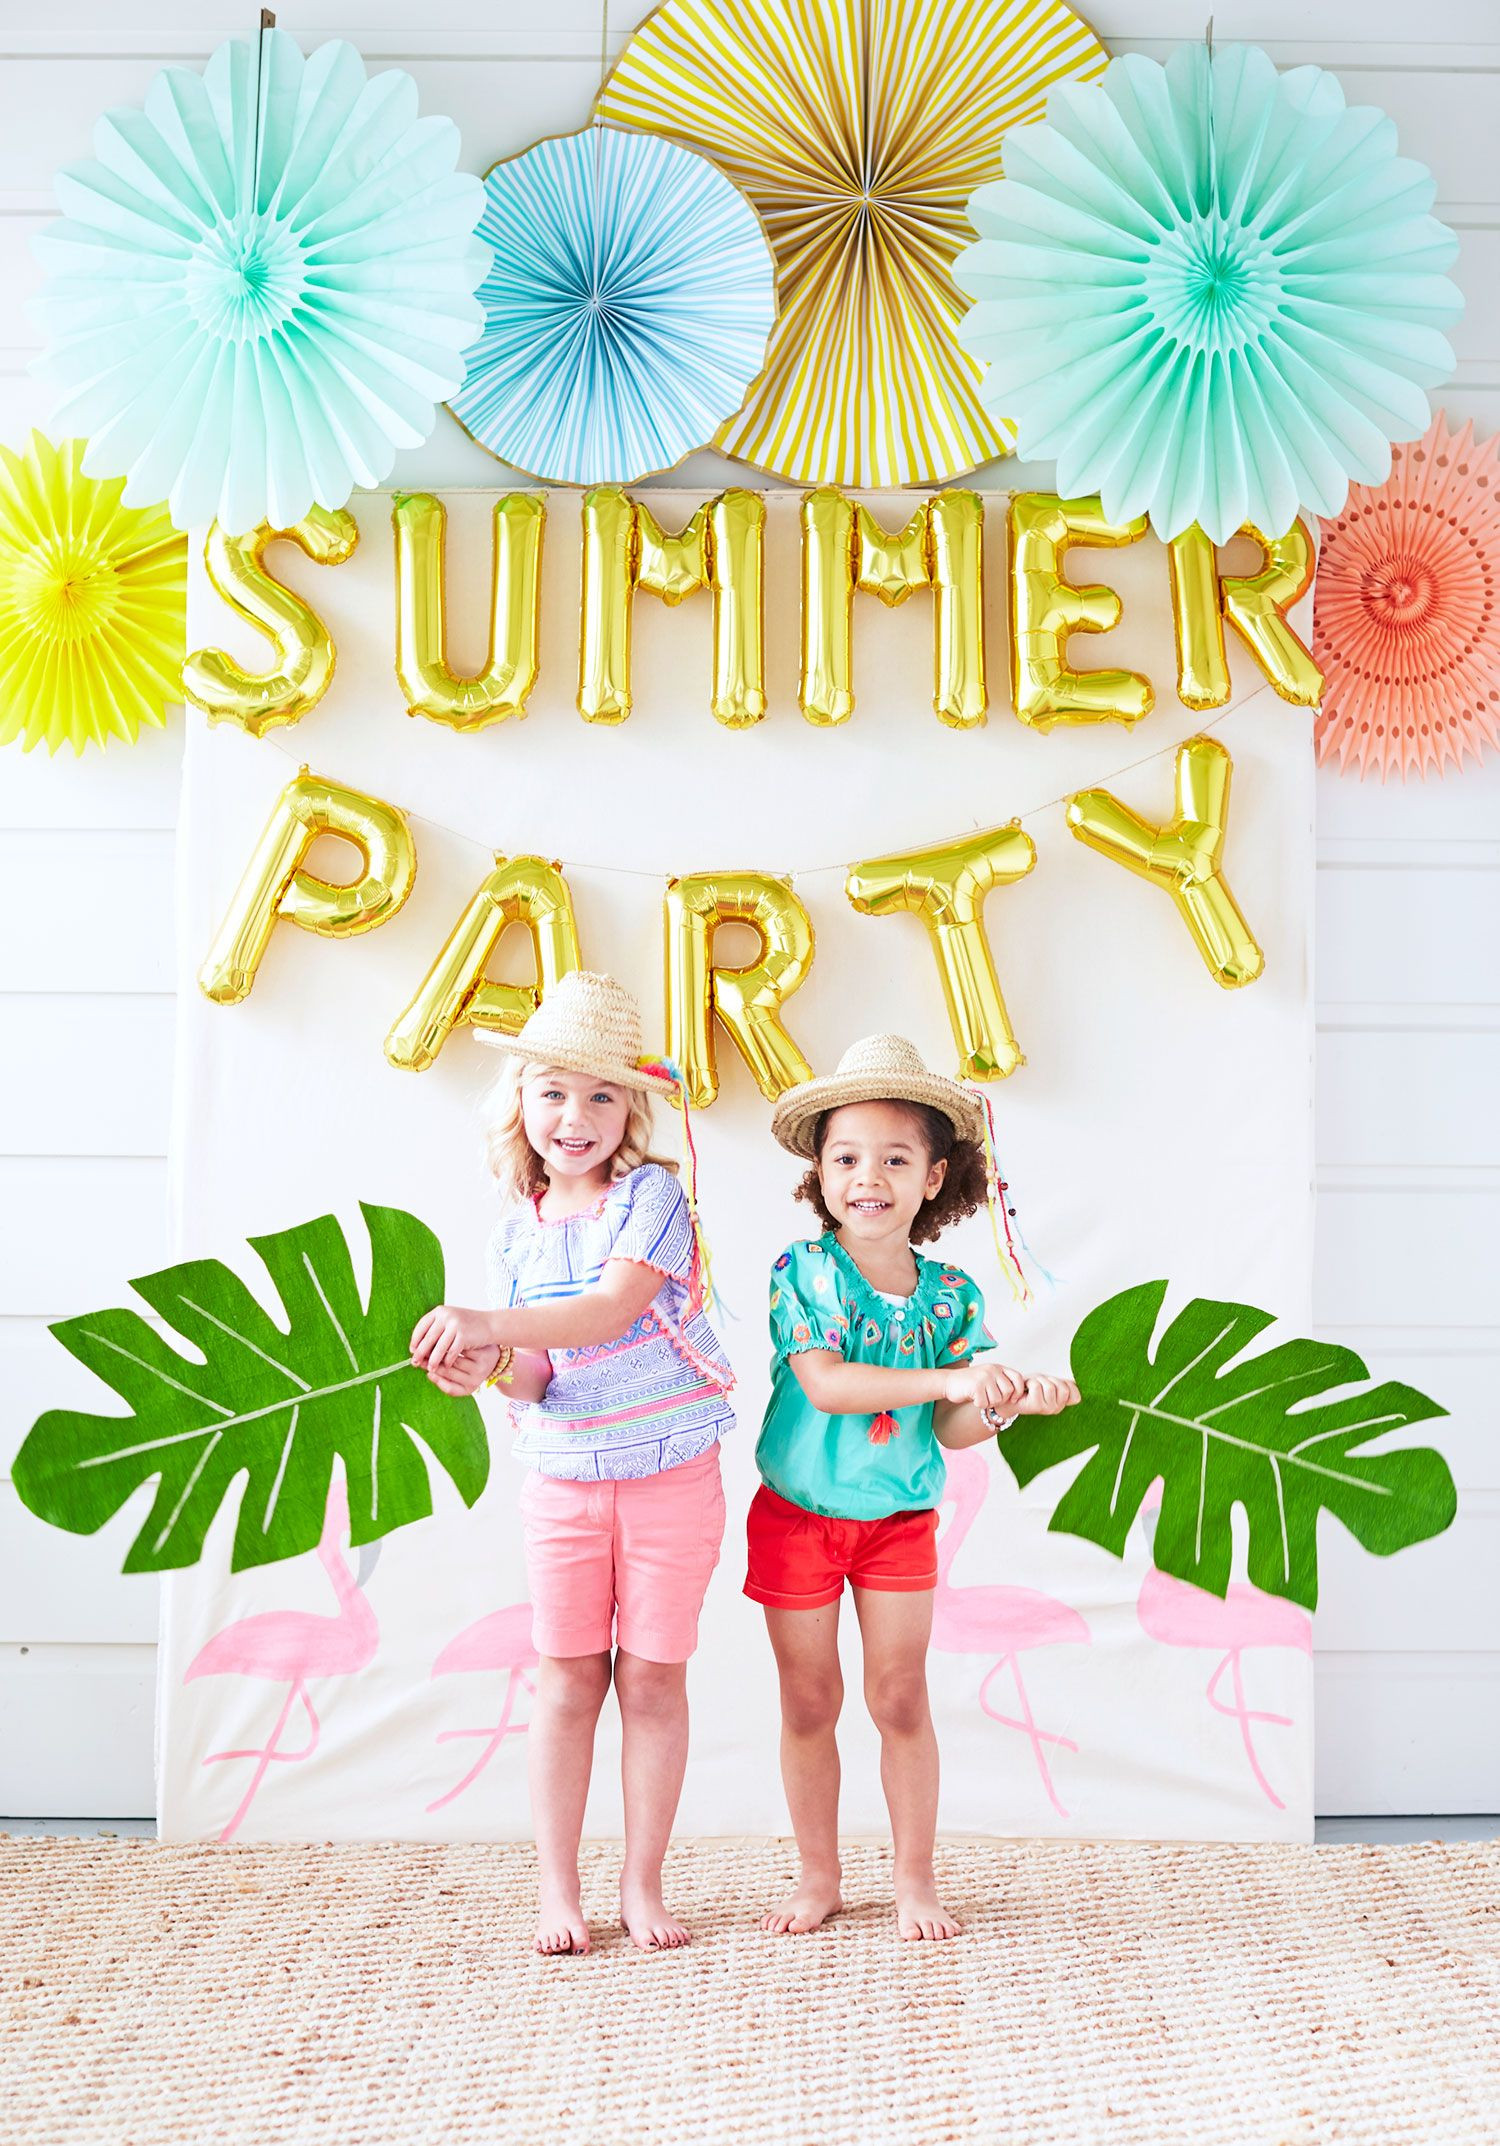 Ideas For A Summer Party
 Summer Party Decoration Ideas We Love on Love the Day